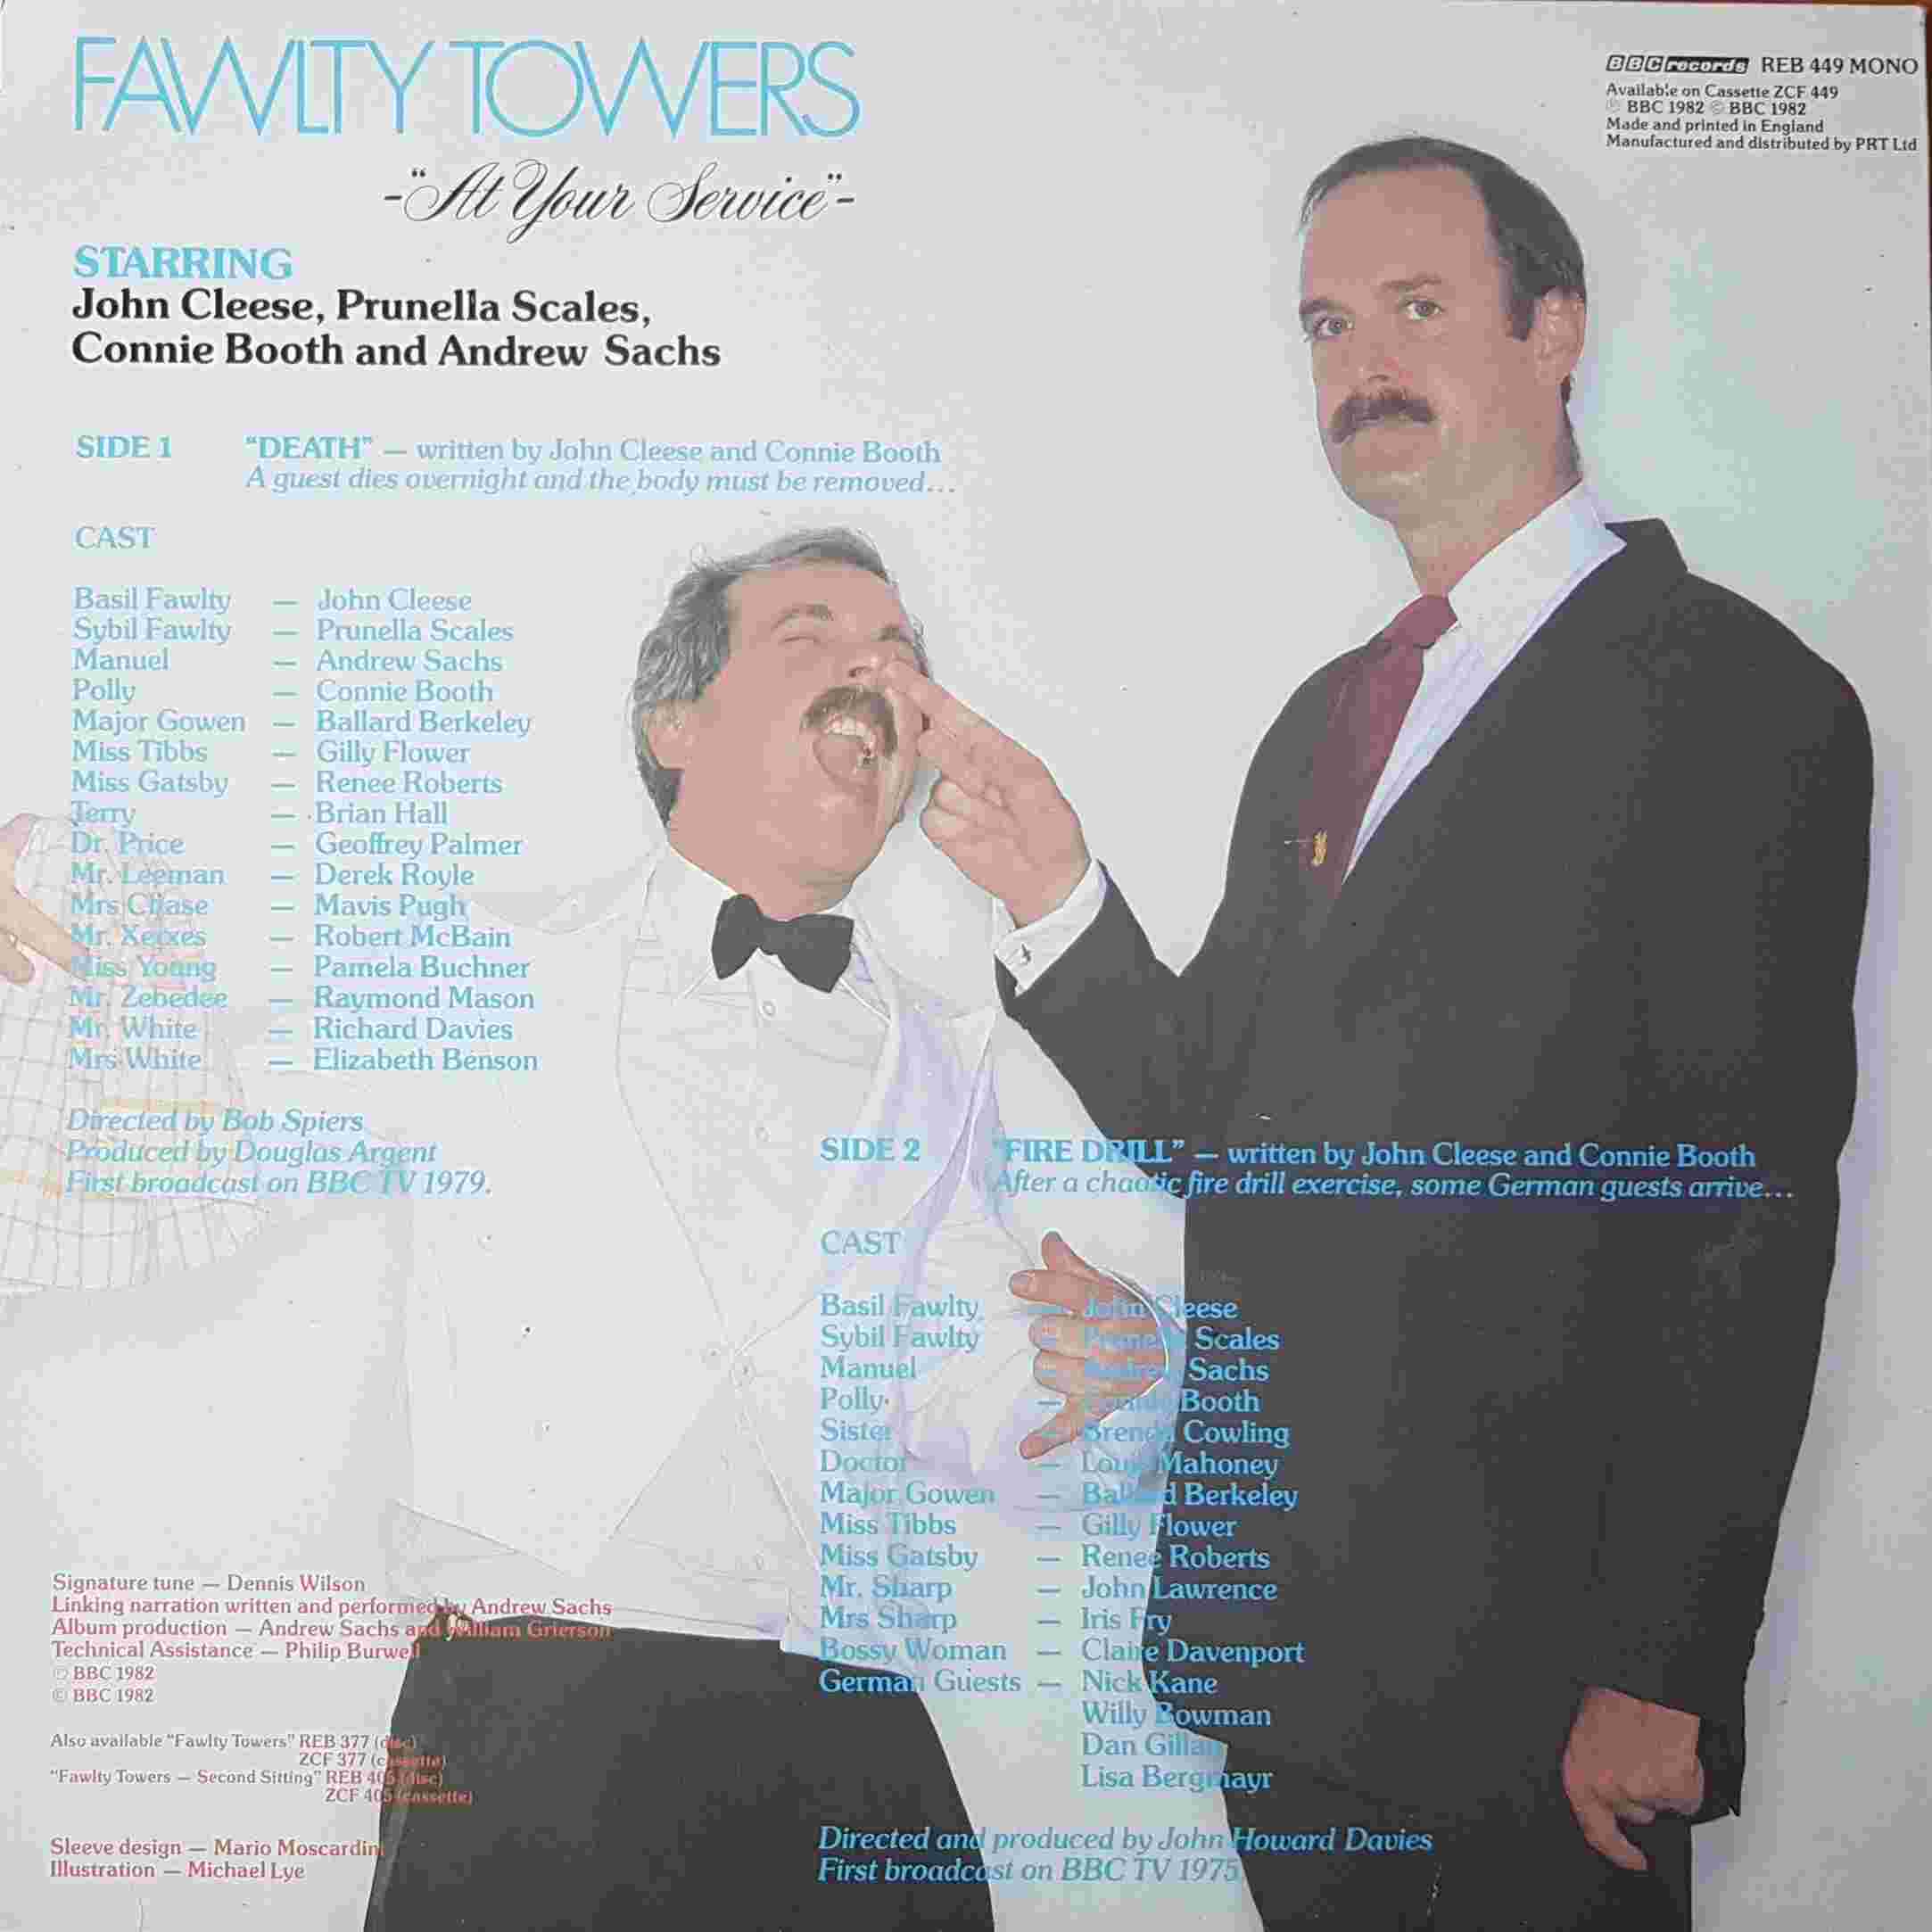 Picture of REB 449 Fawlty towers - At your service by artist John Cleese / Connie Booth from the BBC records and Tapes library